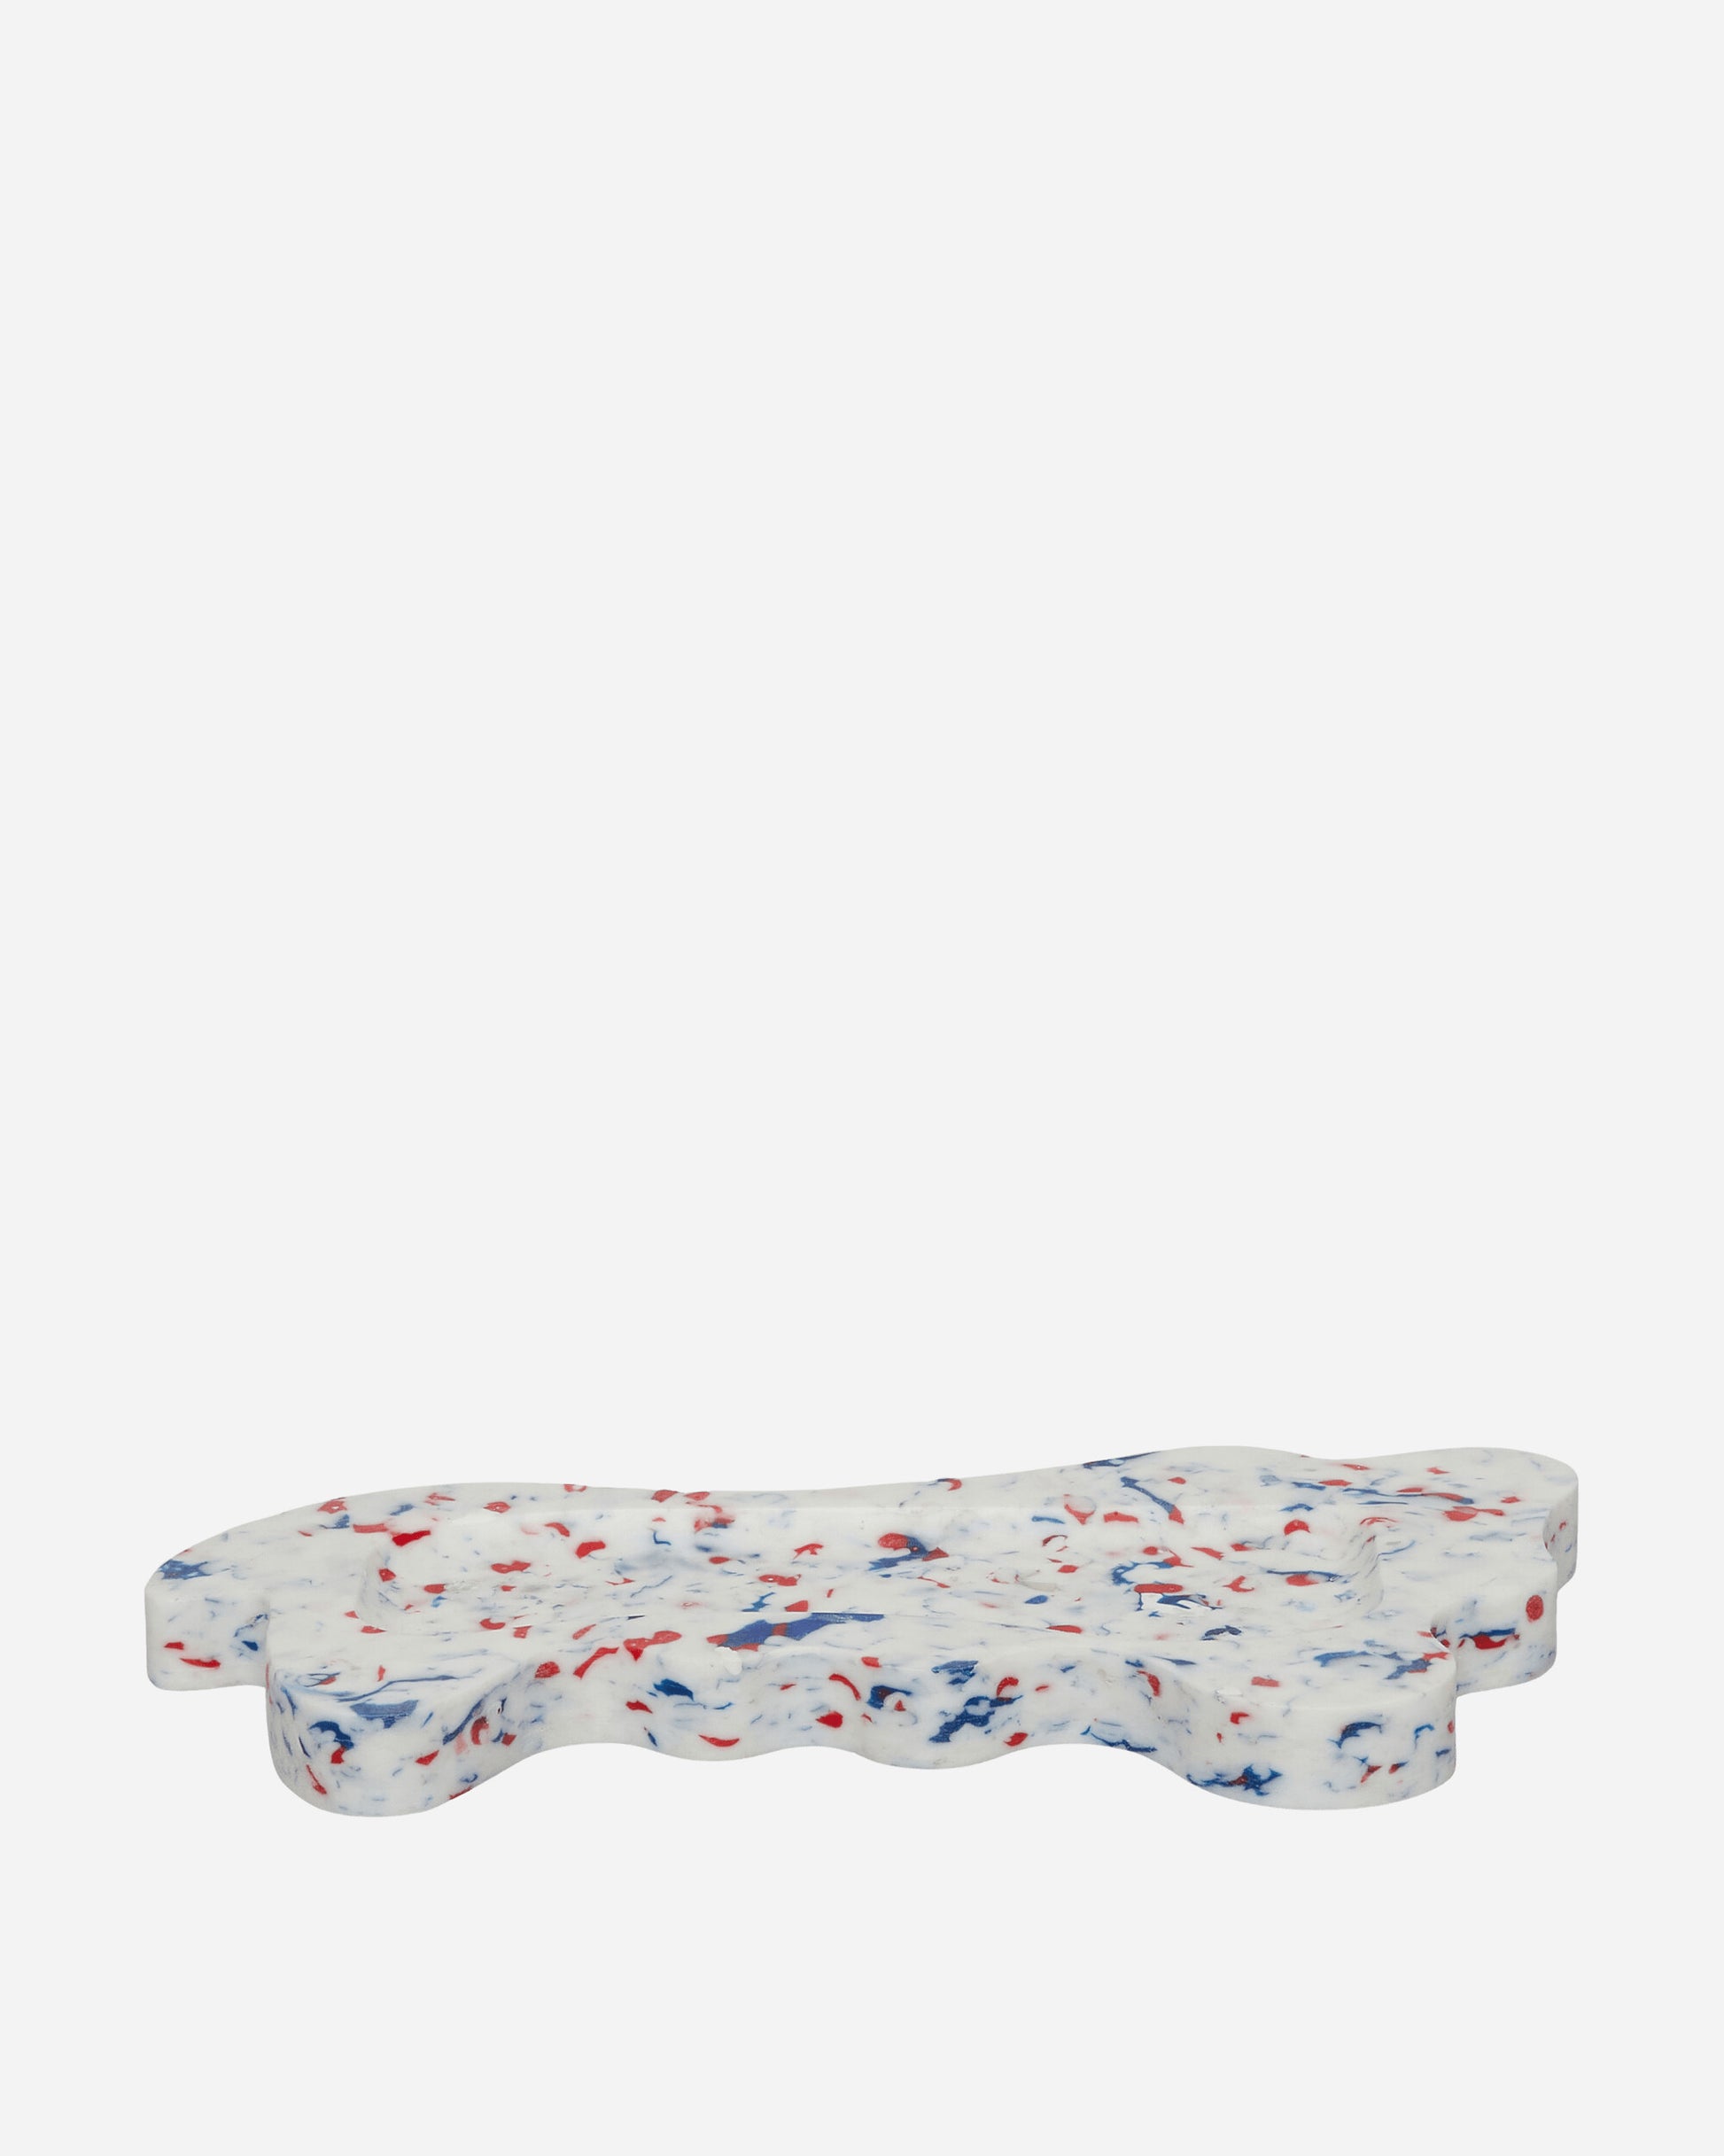 Space Available Melted Structures : Desk Tray White Multi Homeware Design Items SA-PMST003 WHM